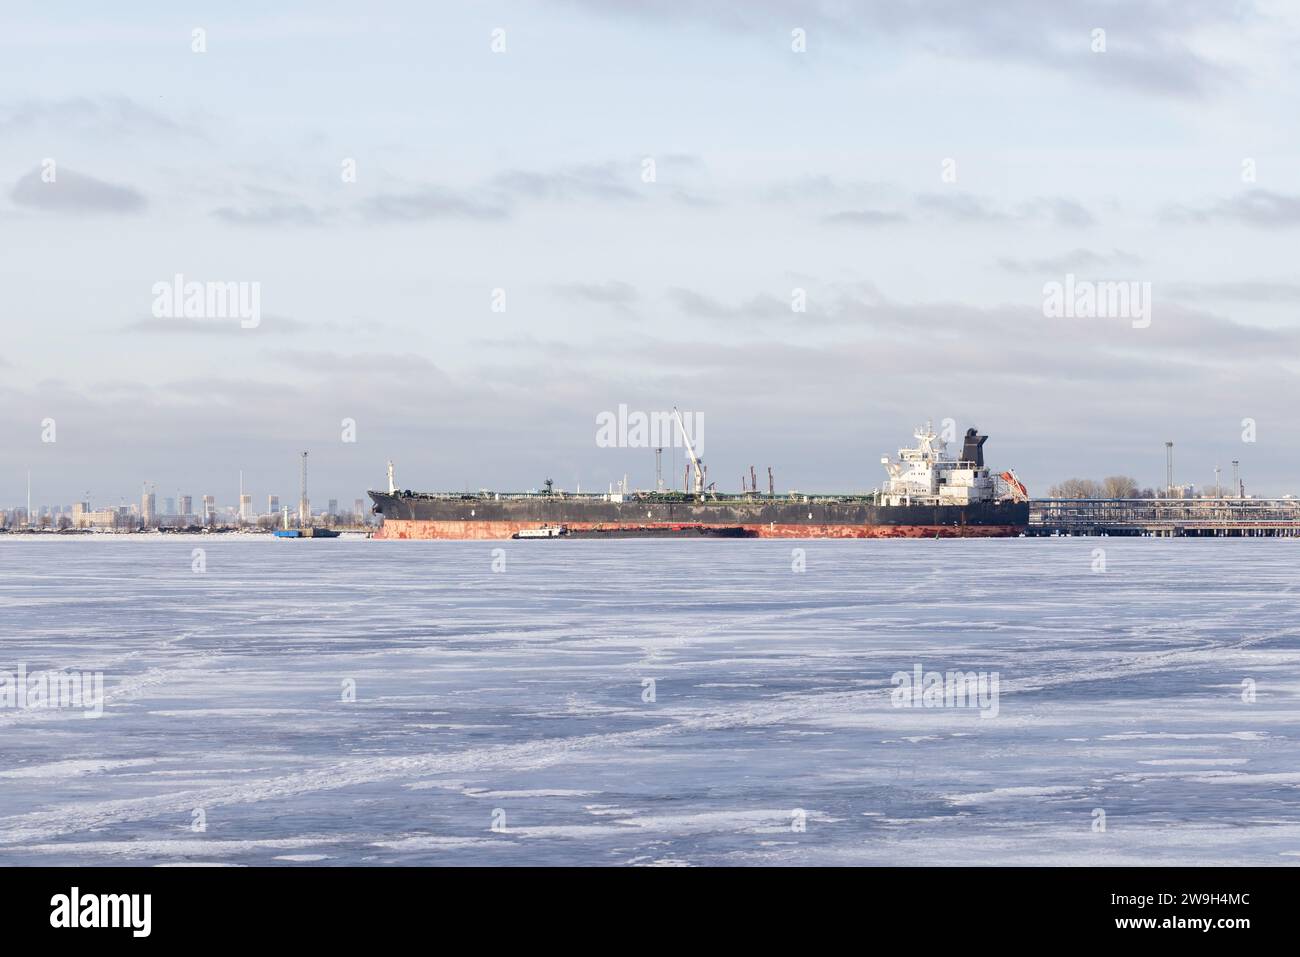 Crude Oil Tanker is loading in port of Saint-Petersburg on a winter day Stock Photo